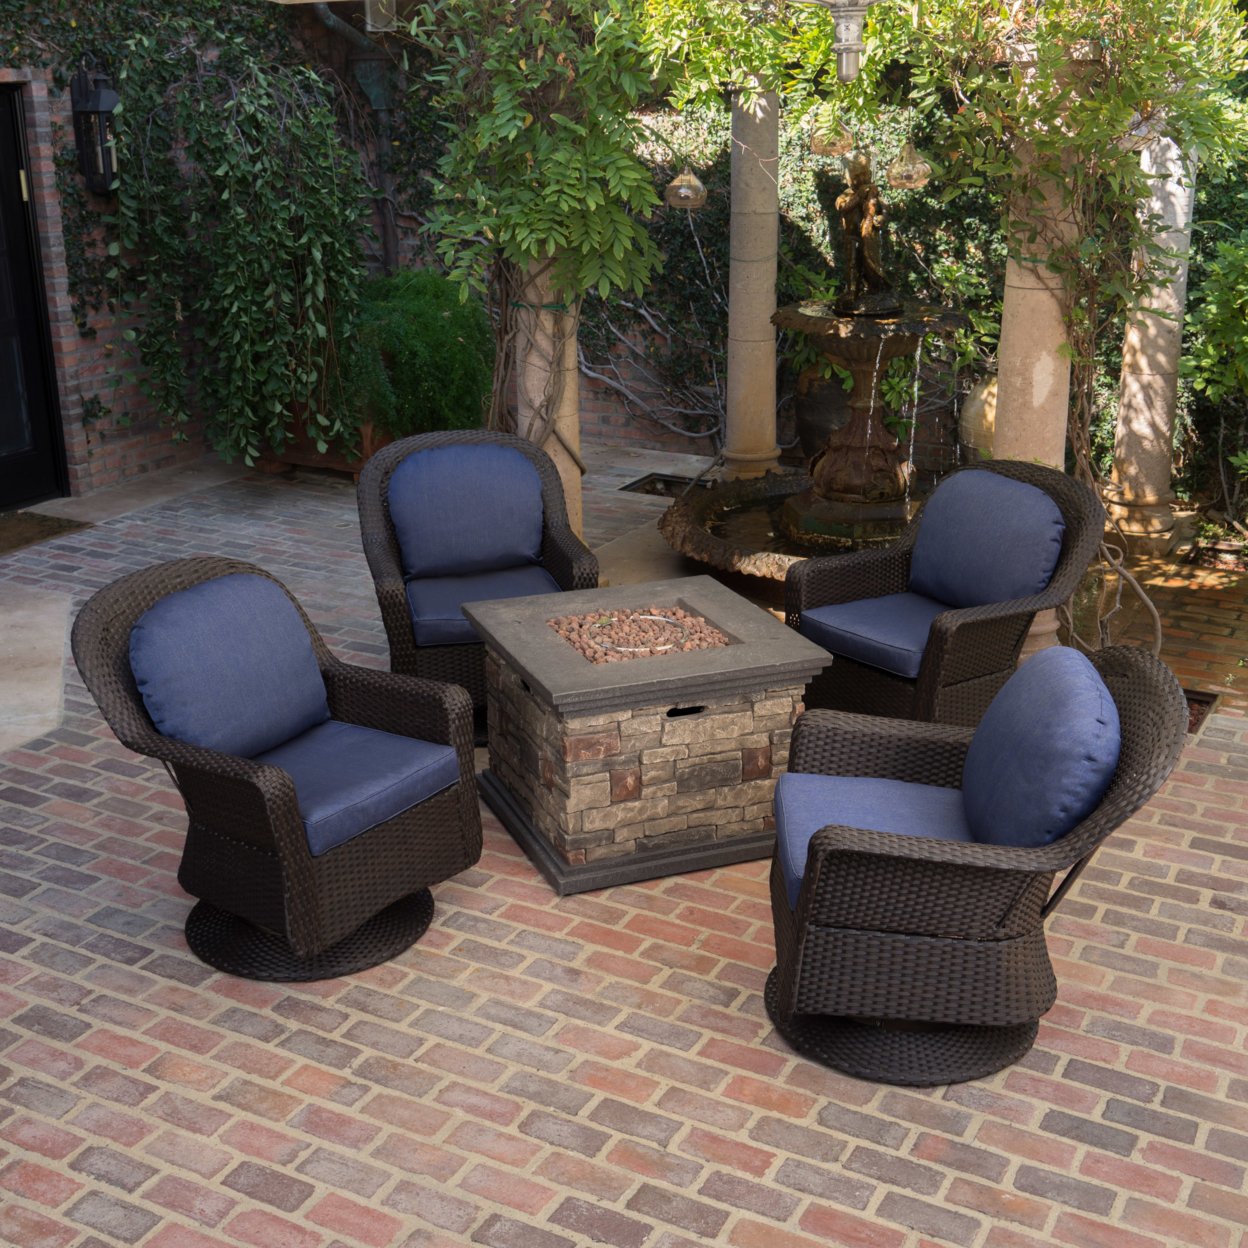 Alameda Outdoor 5 Piece Fire Pit Wicker Chat Set - Brown/Ceramic Gray